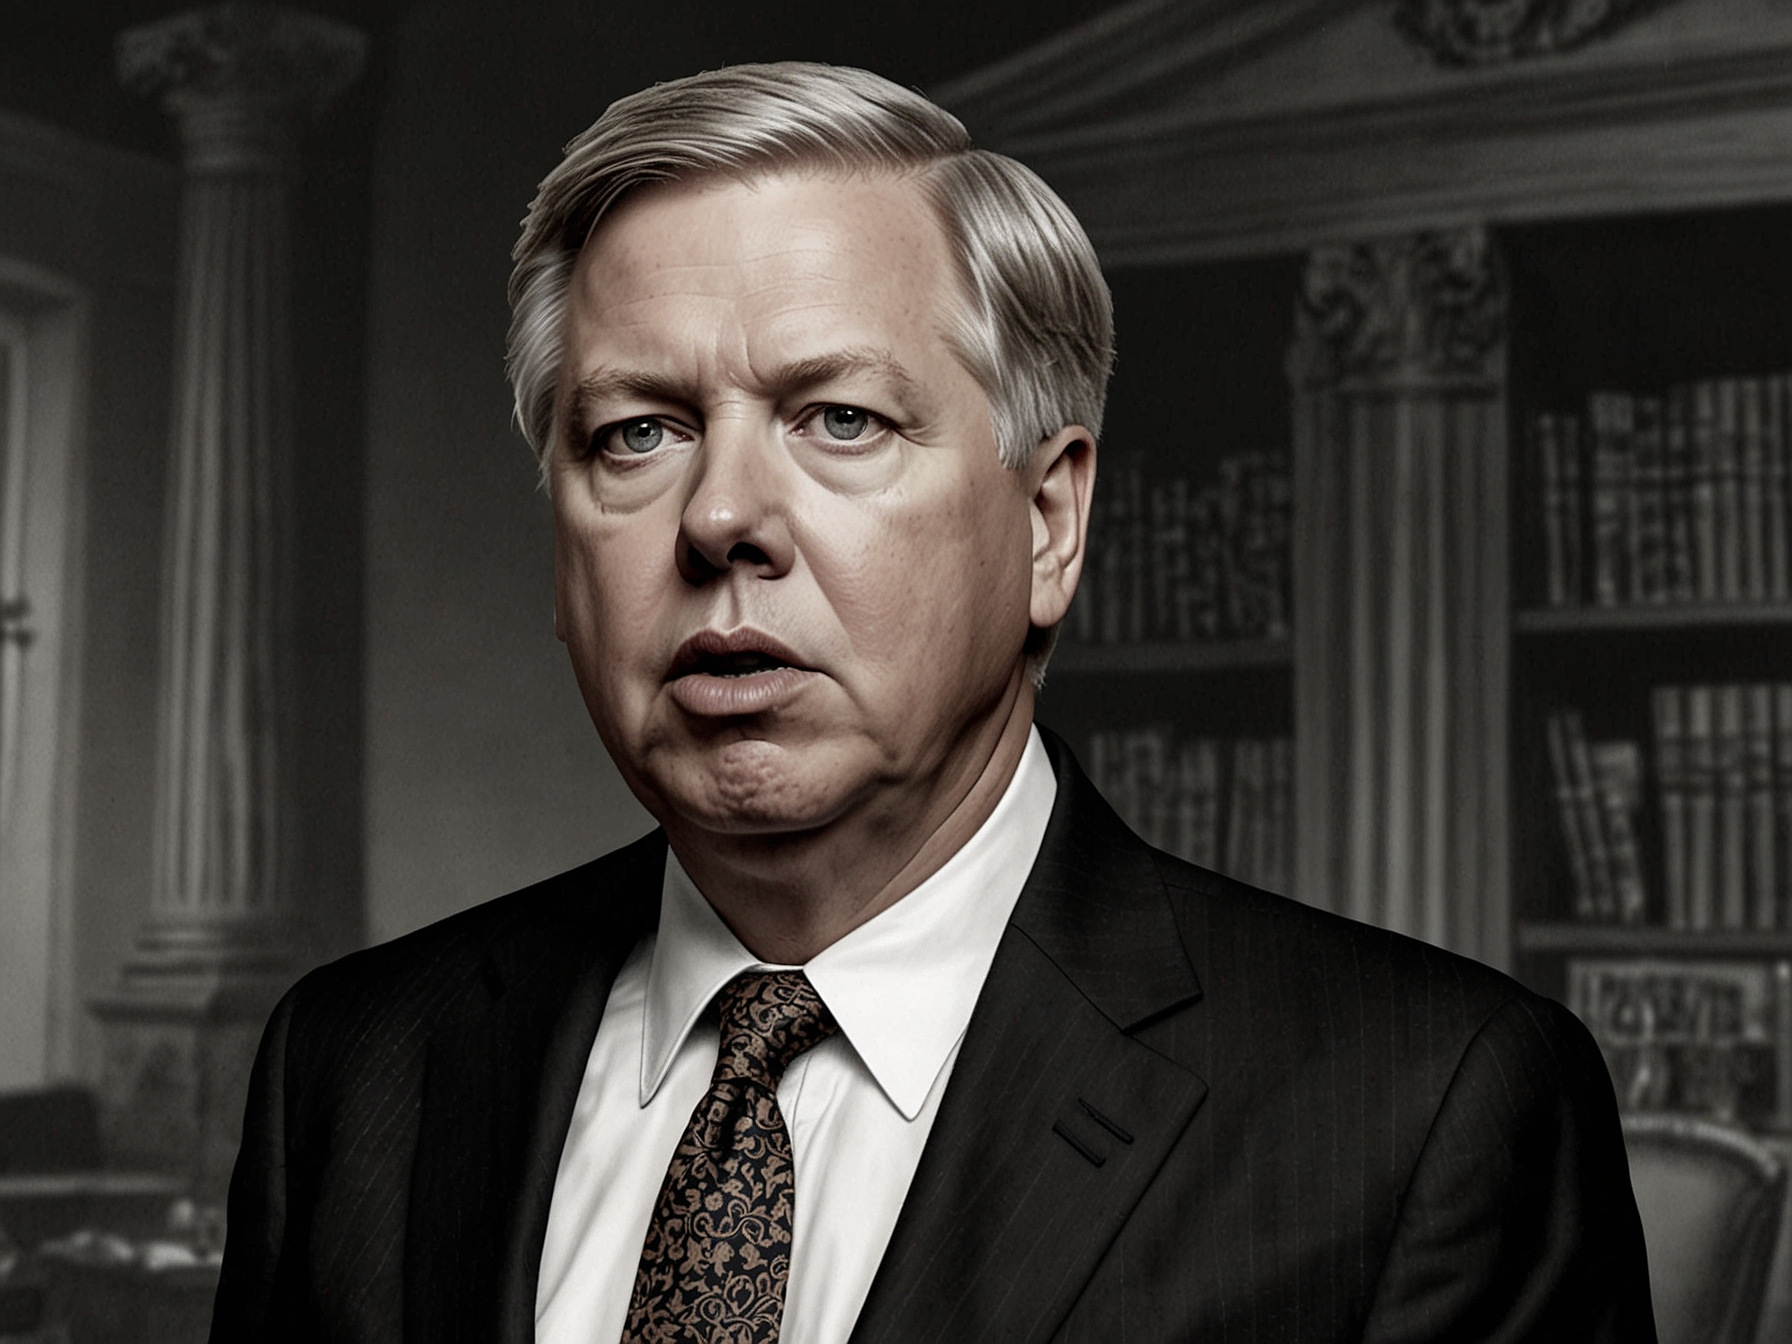 Senator Lindsey Graham passionately speaks on Fox News, alleging that Democrats are targeting conservative Supreme Court justices Samuel Alito and Clarence Thomas, aiming to tarnish their reputations.